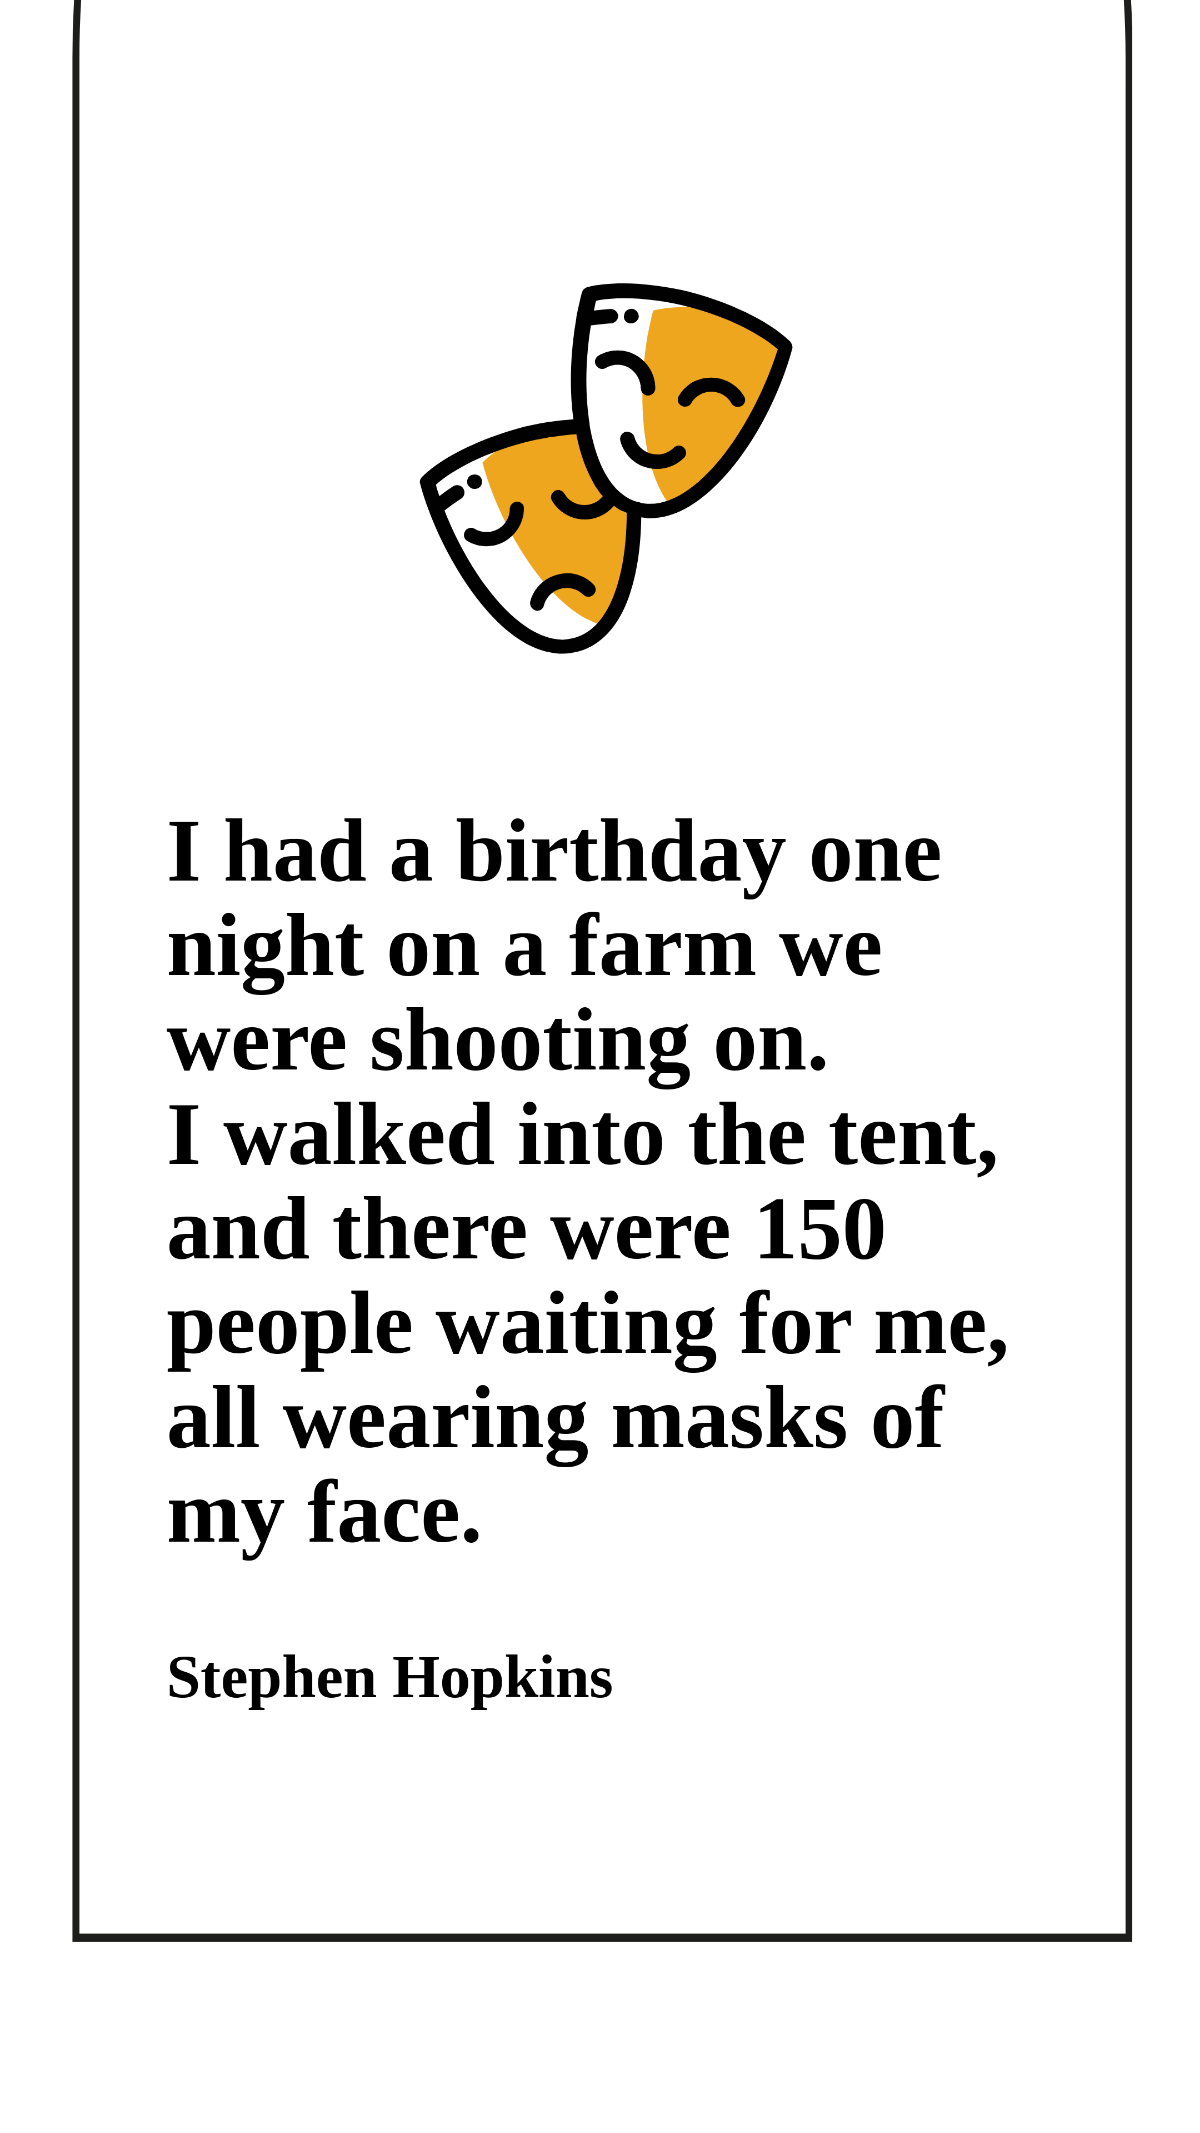 Stephen Hopkins - I had a birthday one night on a farm we were shooting on. I walked into the tent, and there were 150 people waiting for me, all wearing masks of my face. Template